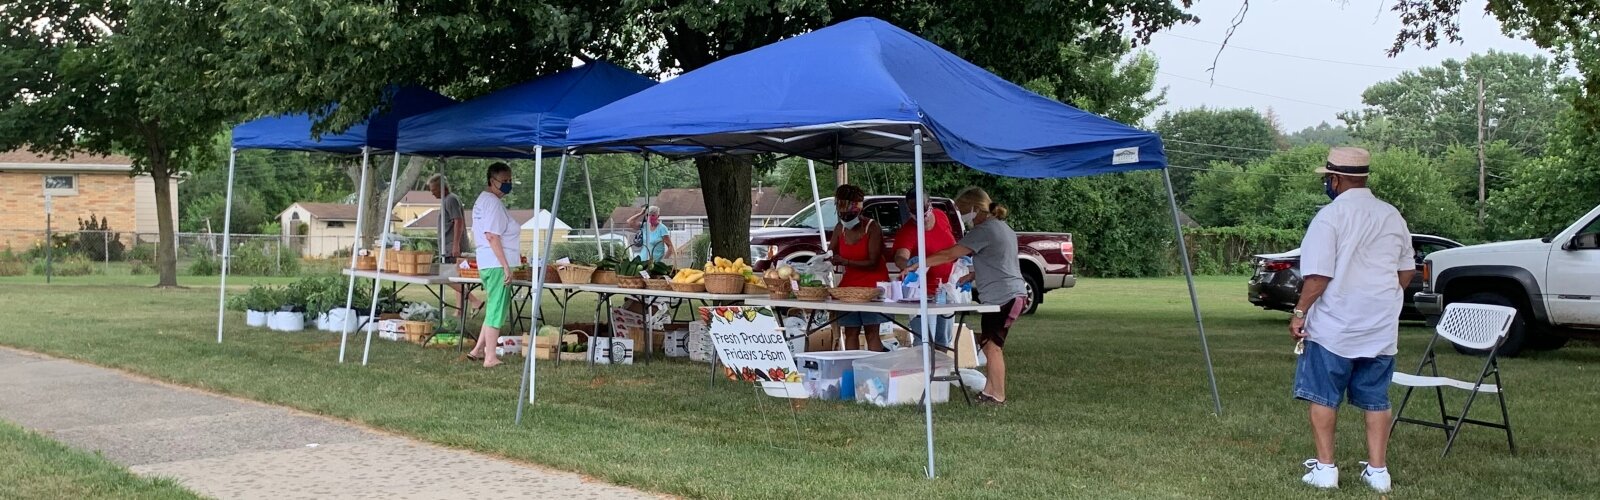 A farm stand coordinated by Springfield Ohio Urban Plantfolk (SOUP) sets up to sell fresh produce at Perrin Woods Elementary School.